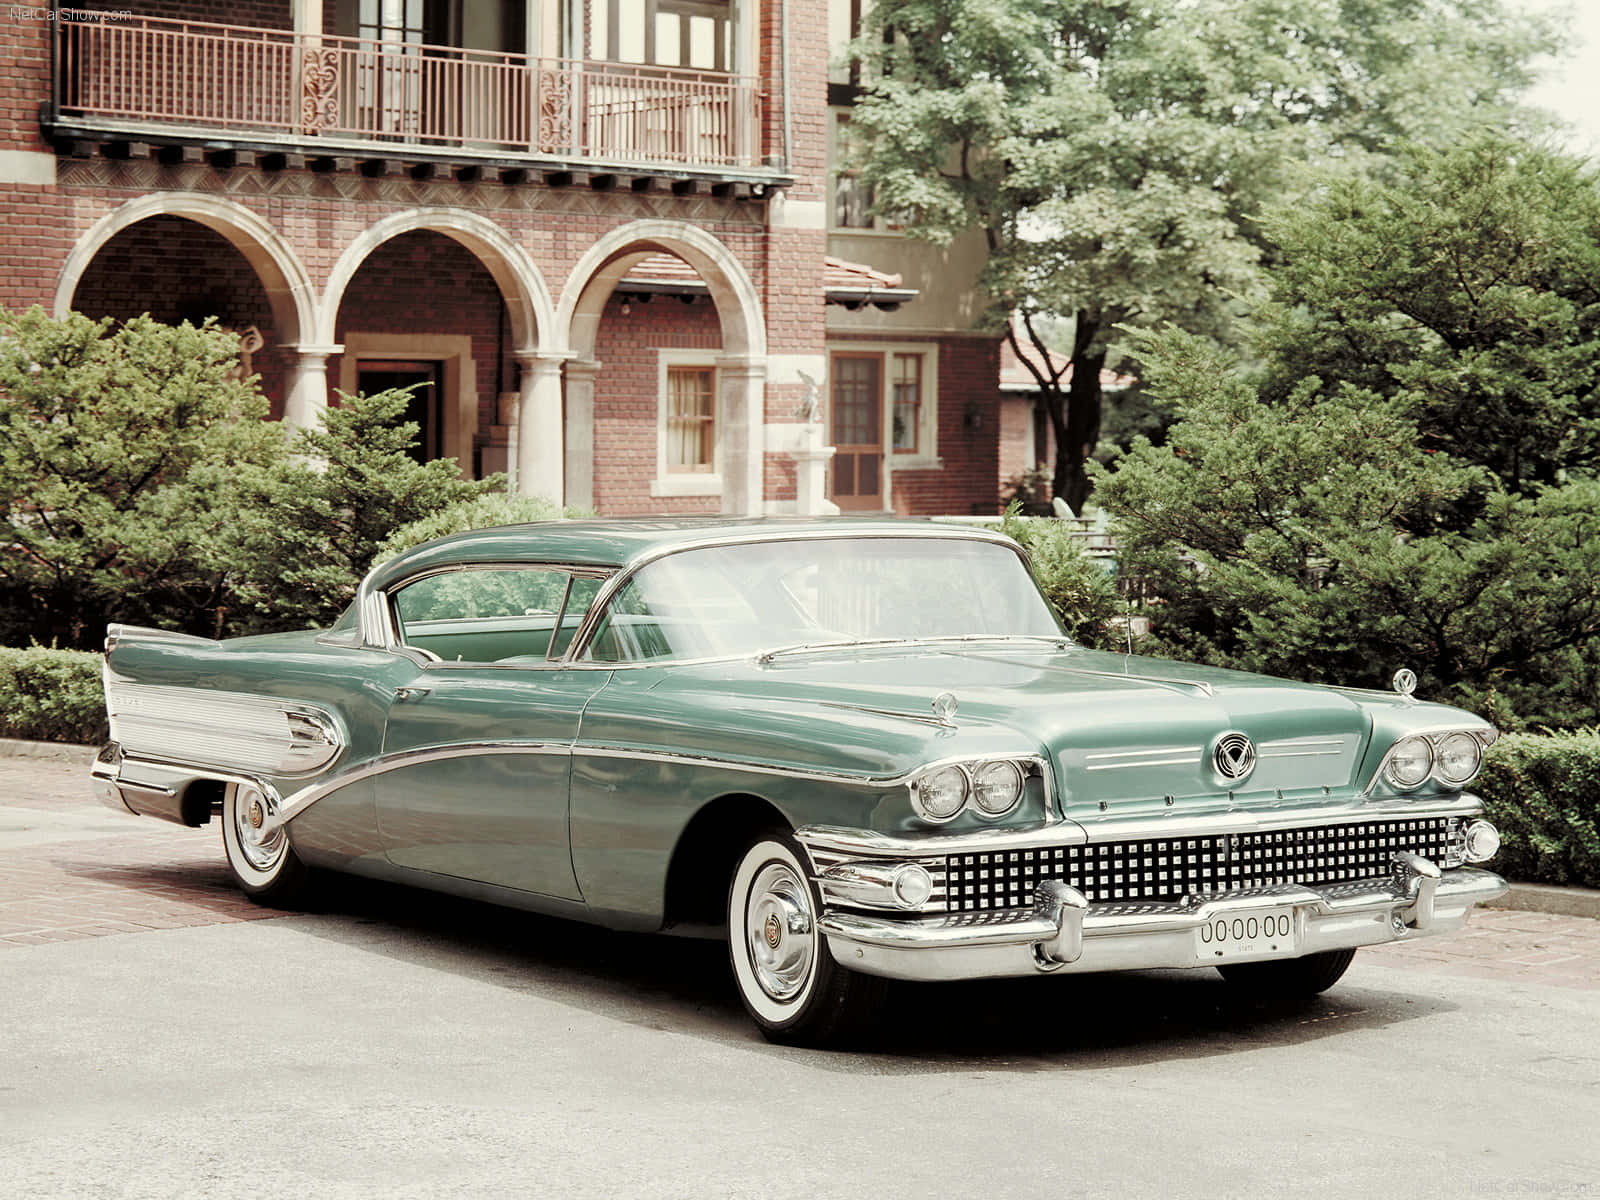 Classic Beauty: the Buick Limited Vintage Car Wallpaper